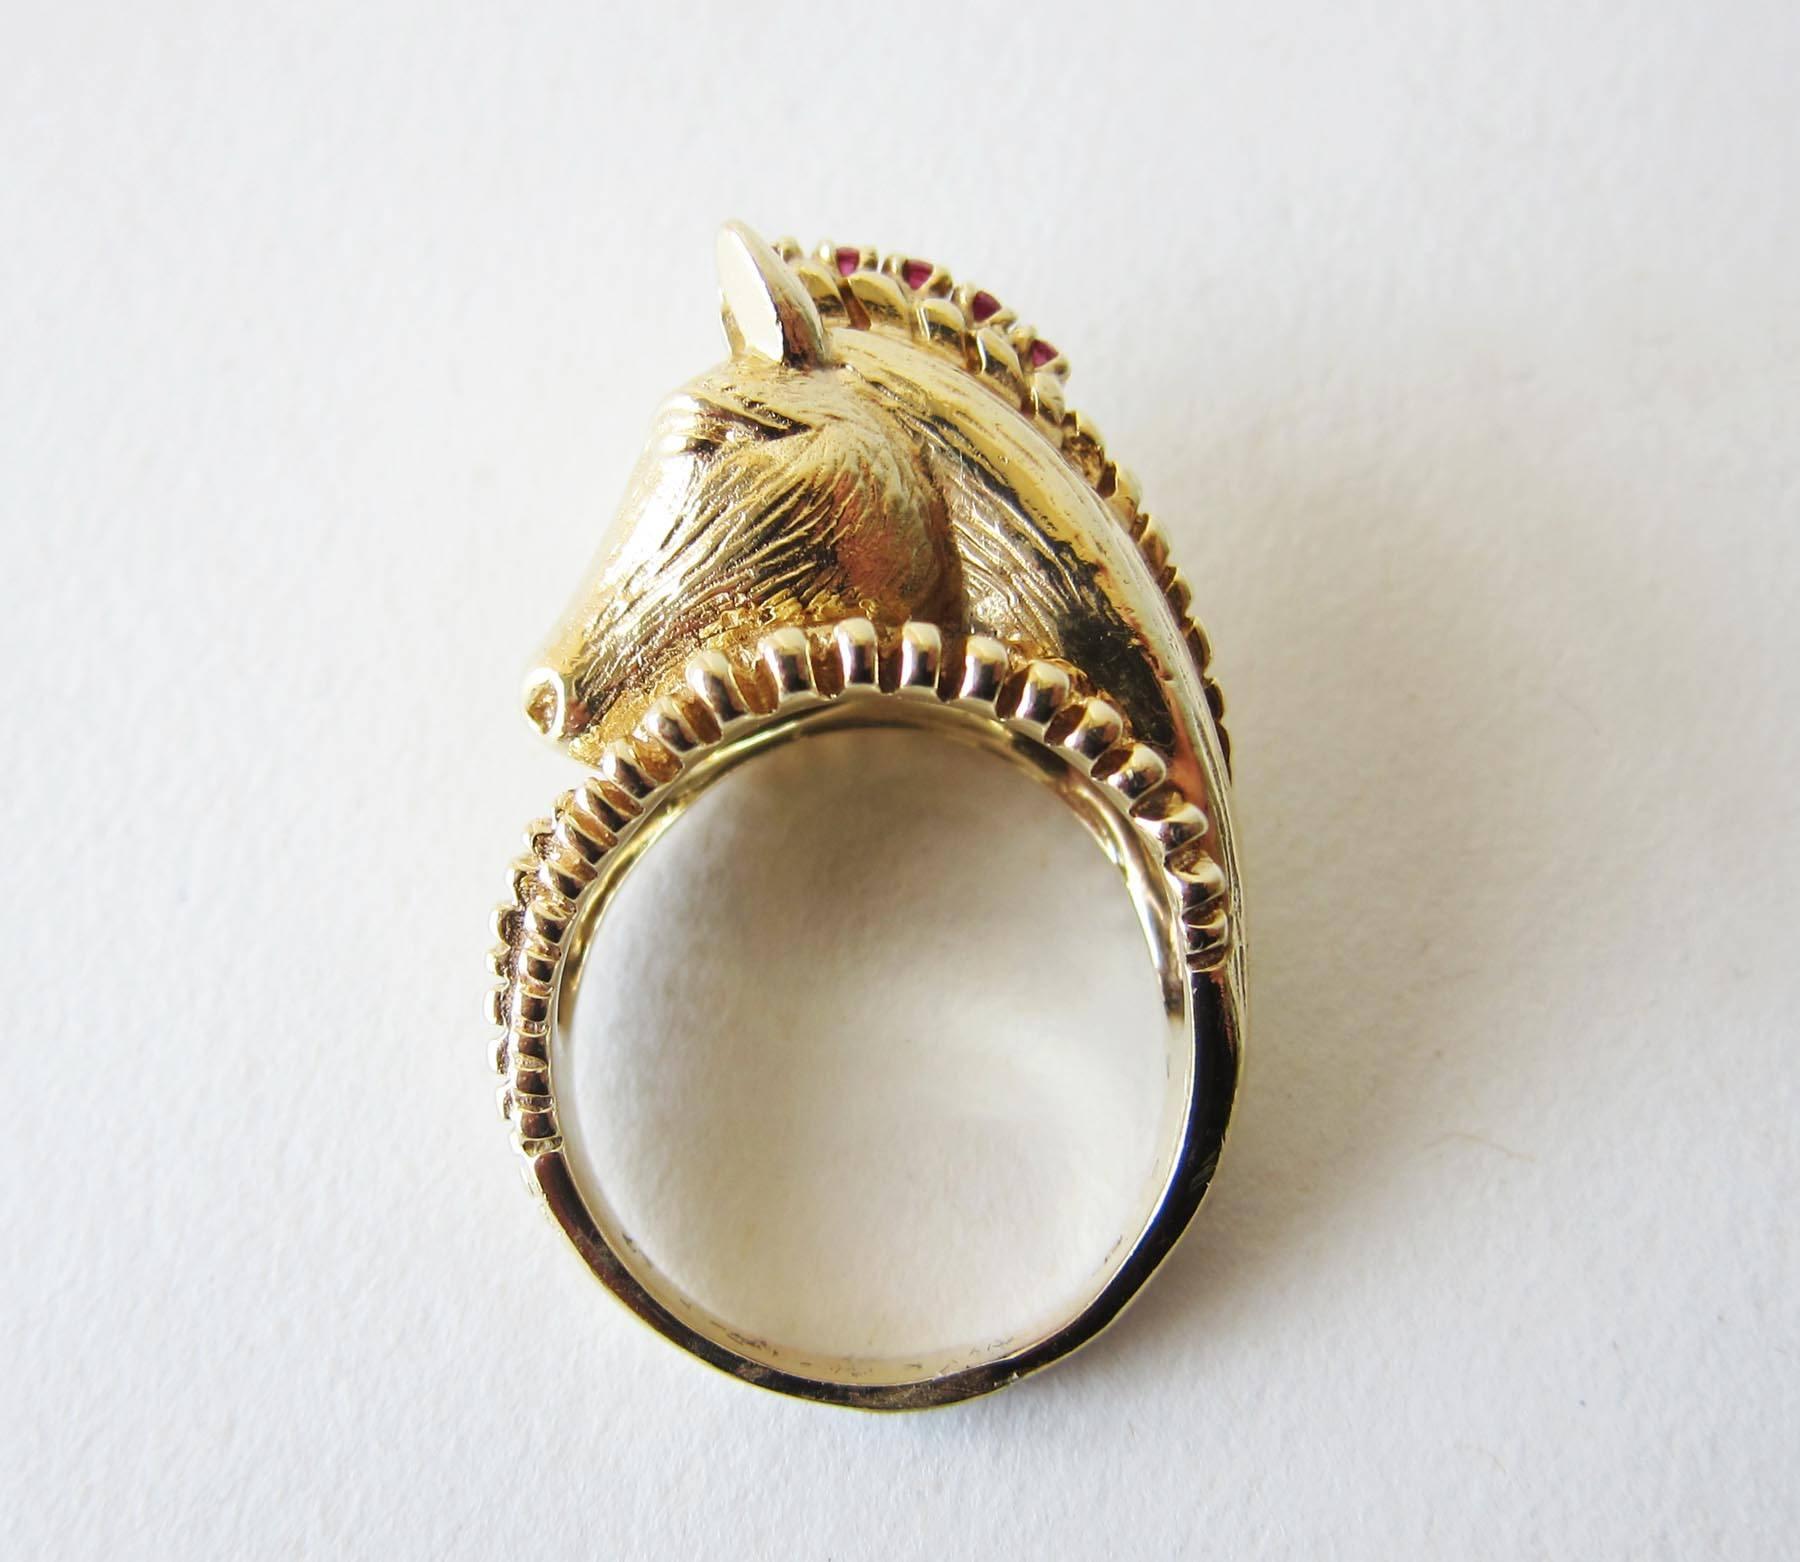 1970's 14k gold, ruby and diamond horse head ring, creator unknown.  One diamond in the forehead and 6 small rubies in the mane of the horse makes up this statement ring.  It is a finger size 8.5 and sits about 1/2